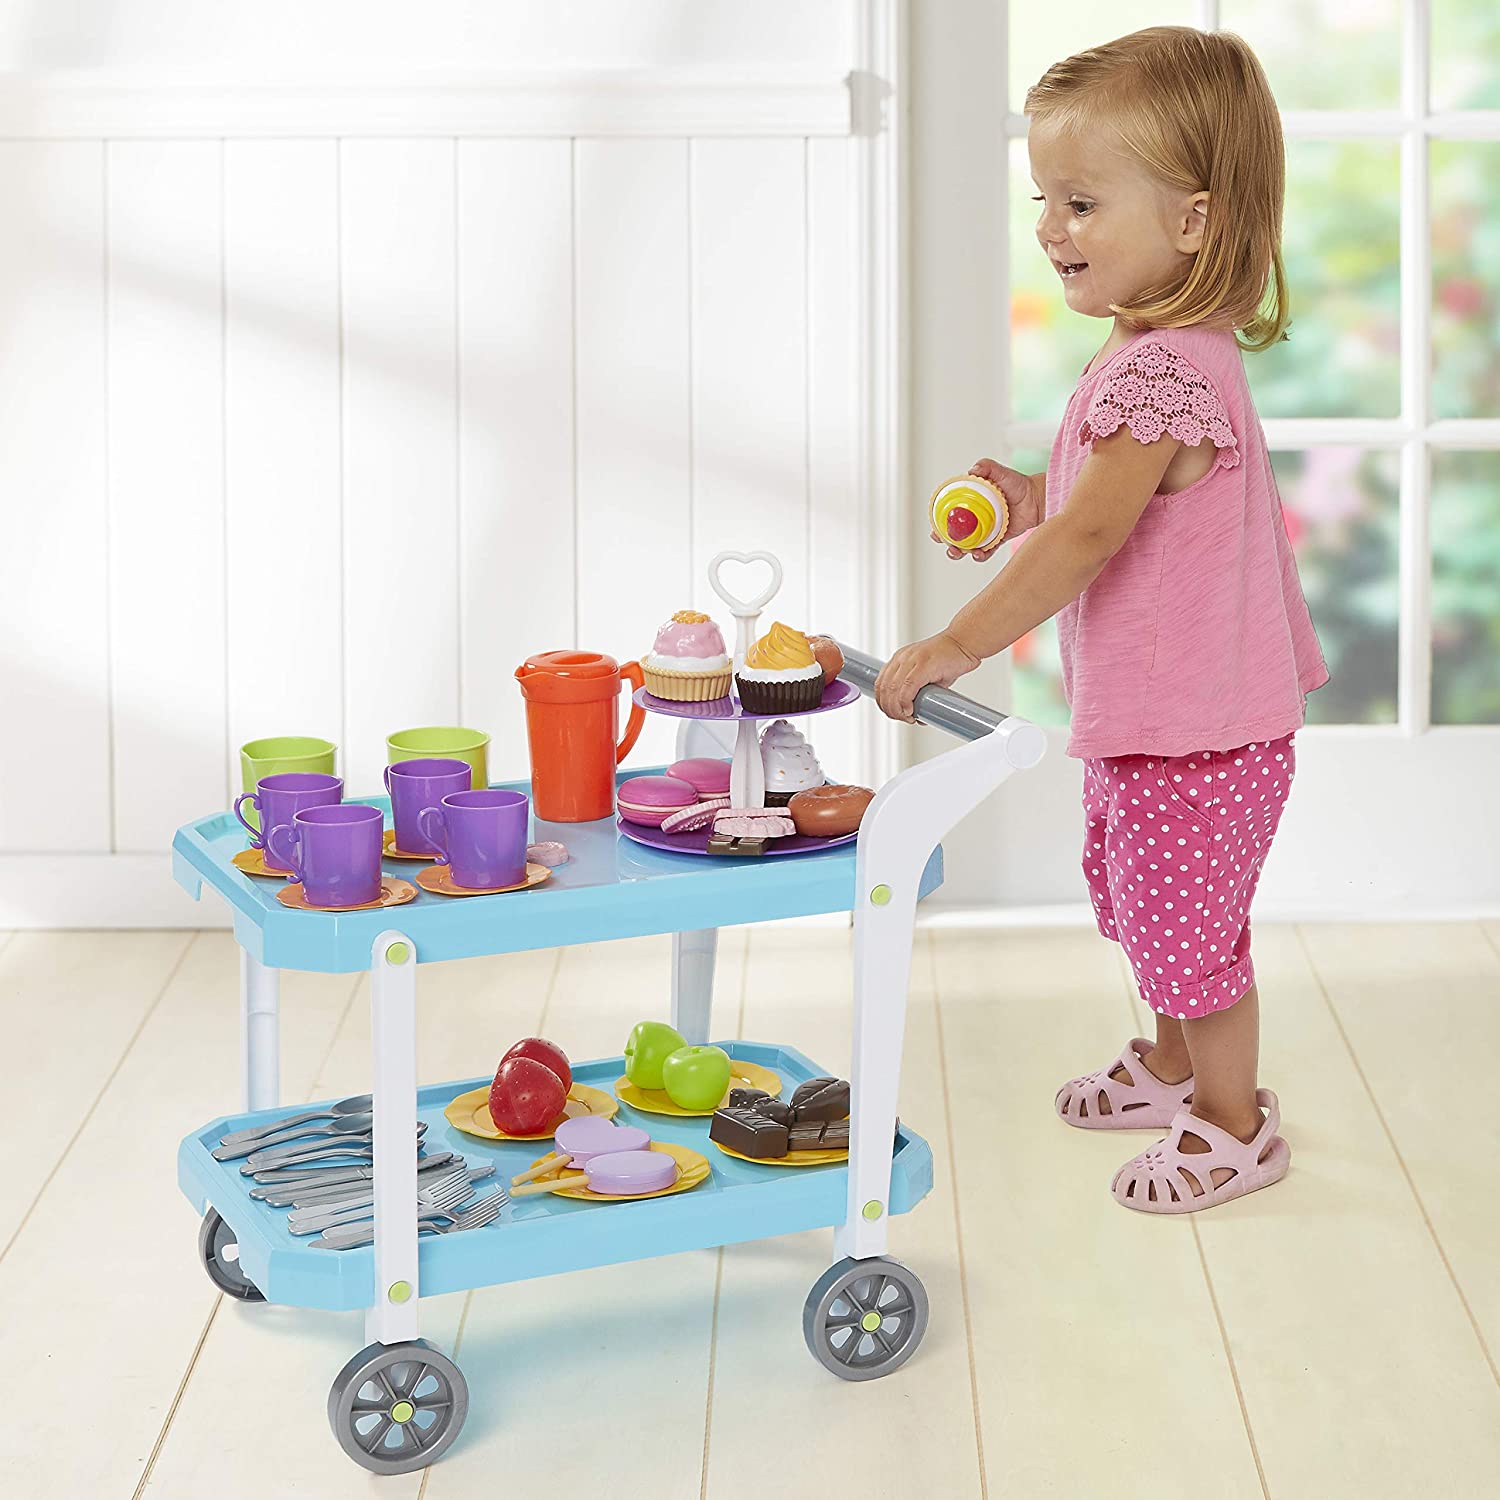 Just Like Home Kids' Tea & Dessert Cart Playset w/ 50+ Accessories $9.05 + Free Shipping w/ Prime or FS on $25+